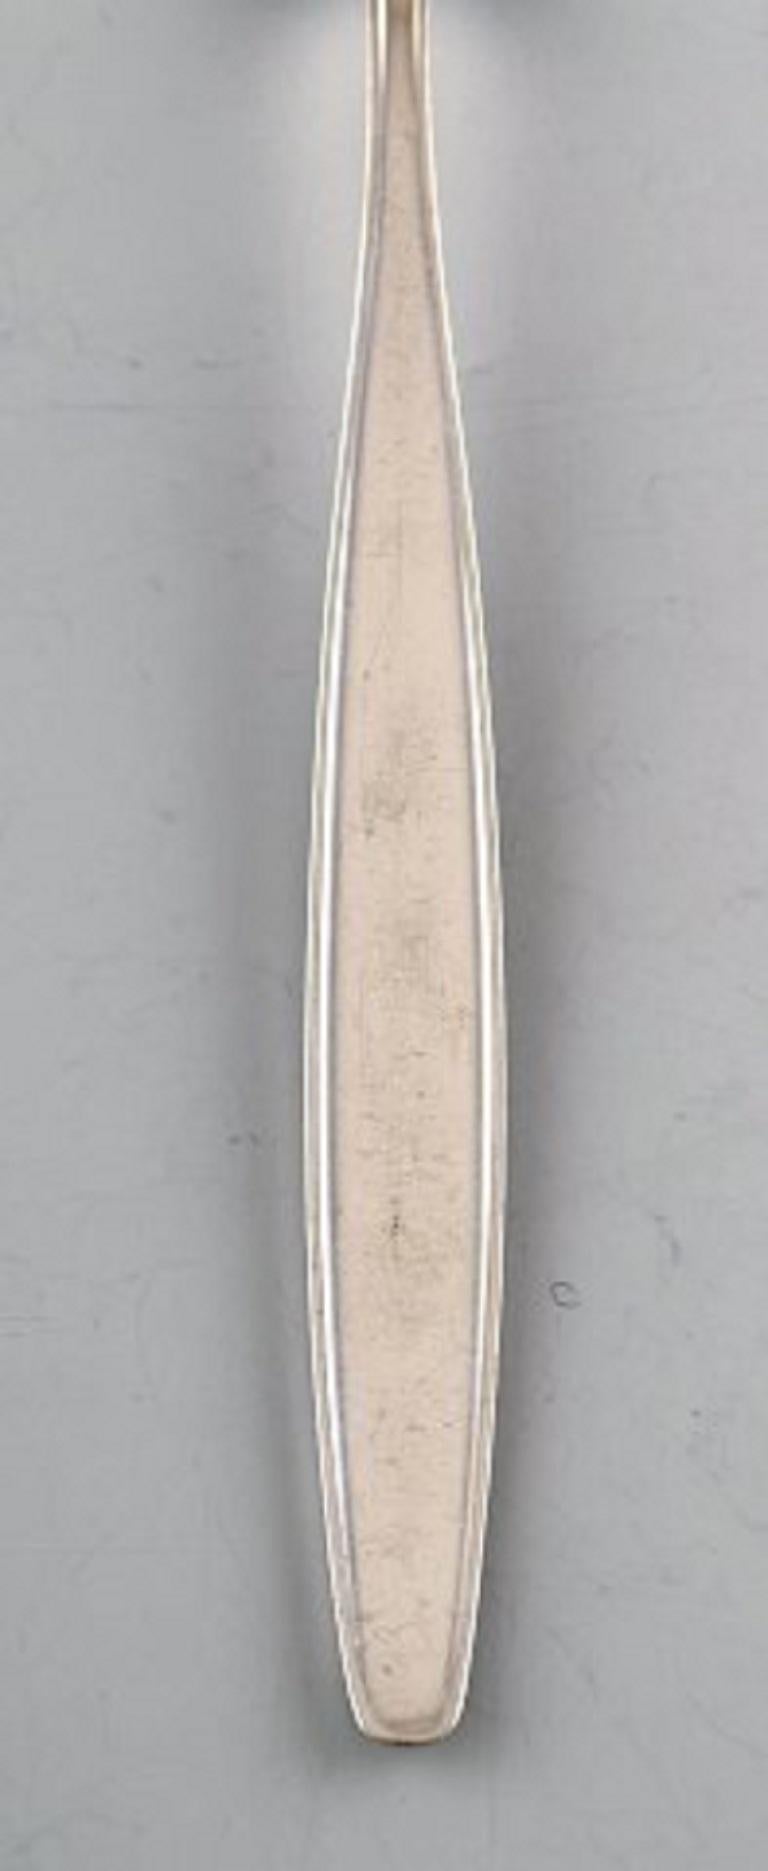 Georg Jensen sterling silver cypress lunch fork.
Measures: 19 cm.
In perfect condition.
Stamped.
Designed by Tias Eckhoff 1952-1953 For Georg Jensen Silversmith, Denmark. Cypress pattern no. 99.
4 pieces in stock.